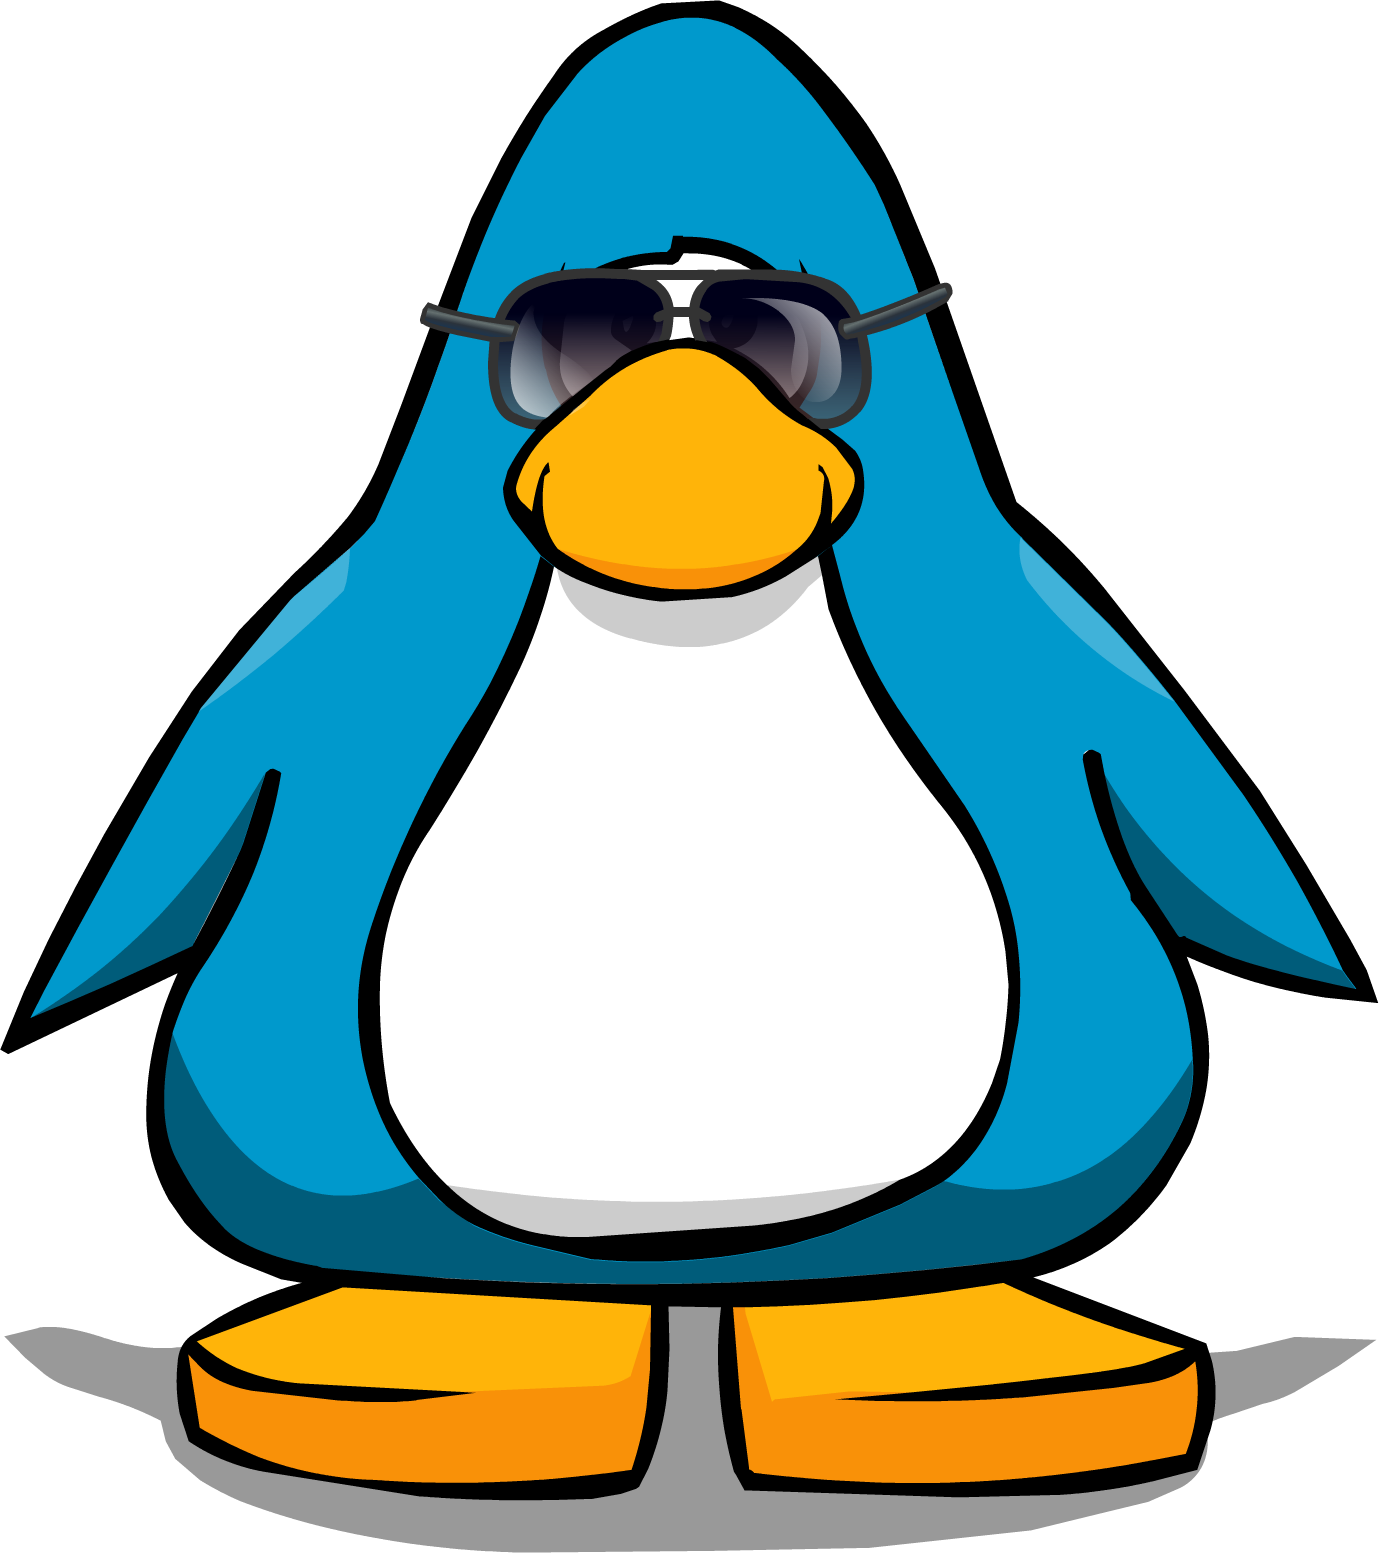 Shady Shades From A Player Card - Club Penguin Non Member (1379x1553)